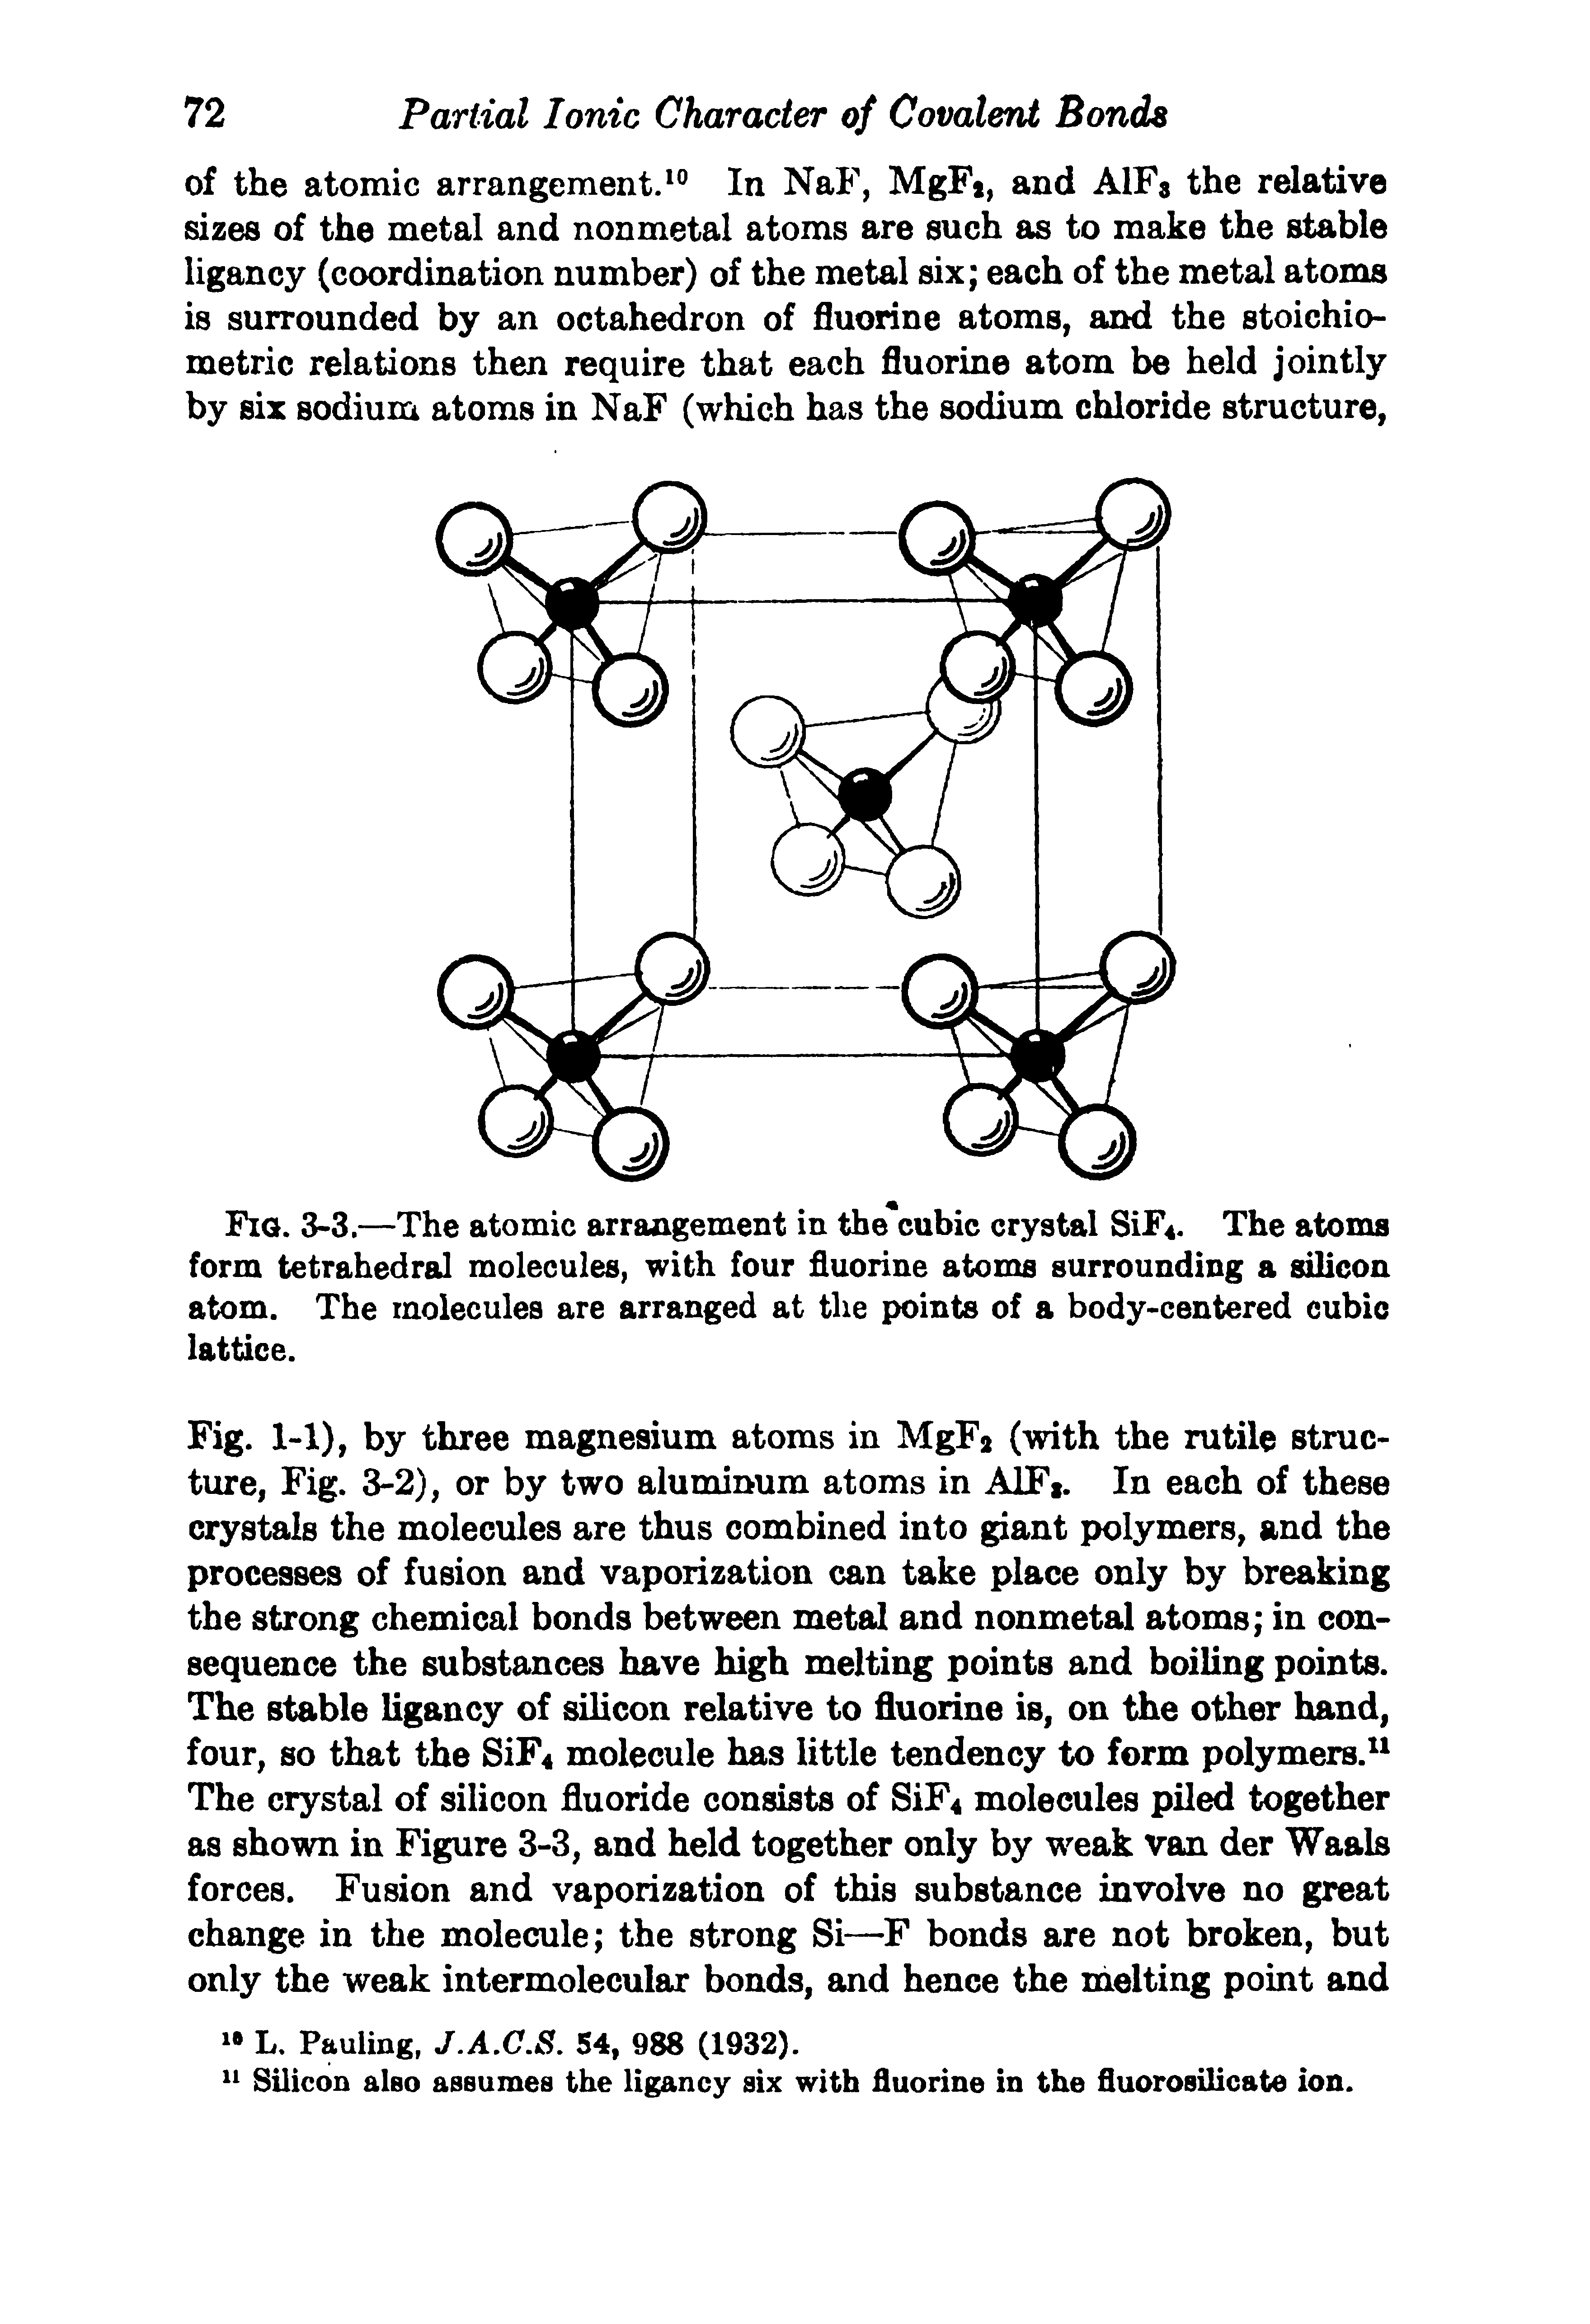 Fig. 3-3.—The atomic arrangement in the cubic crystal SiF4. The atoms form tetrahedral molecules, with four fluorine atoms surrounding a silicon atom. The molecules are arranged at tlie points of a body-centered cubic lattice.